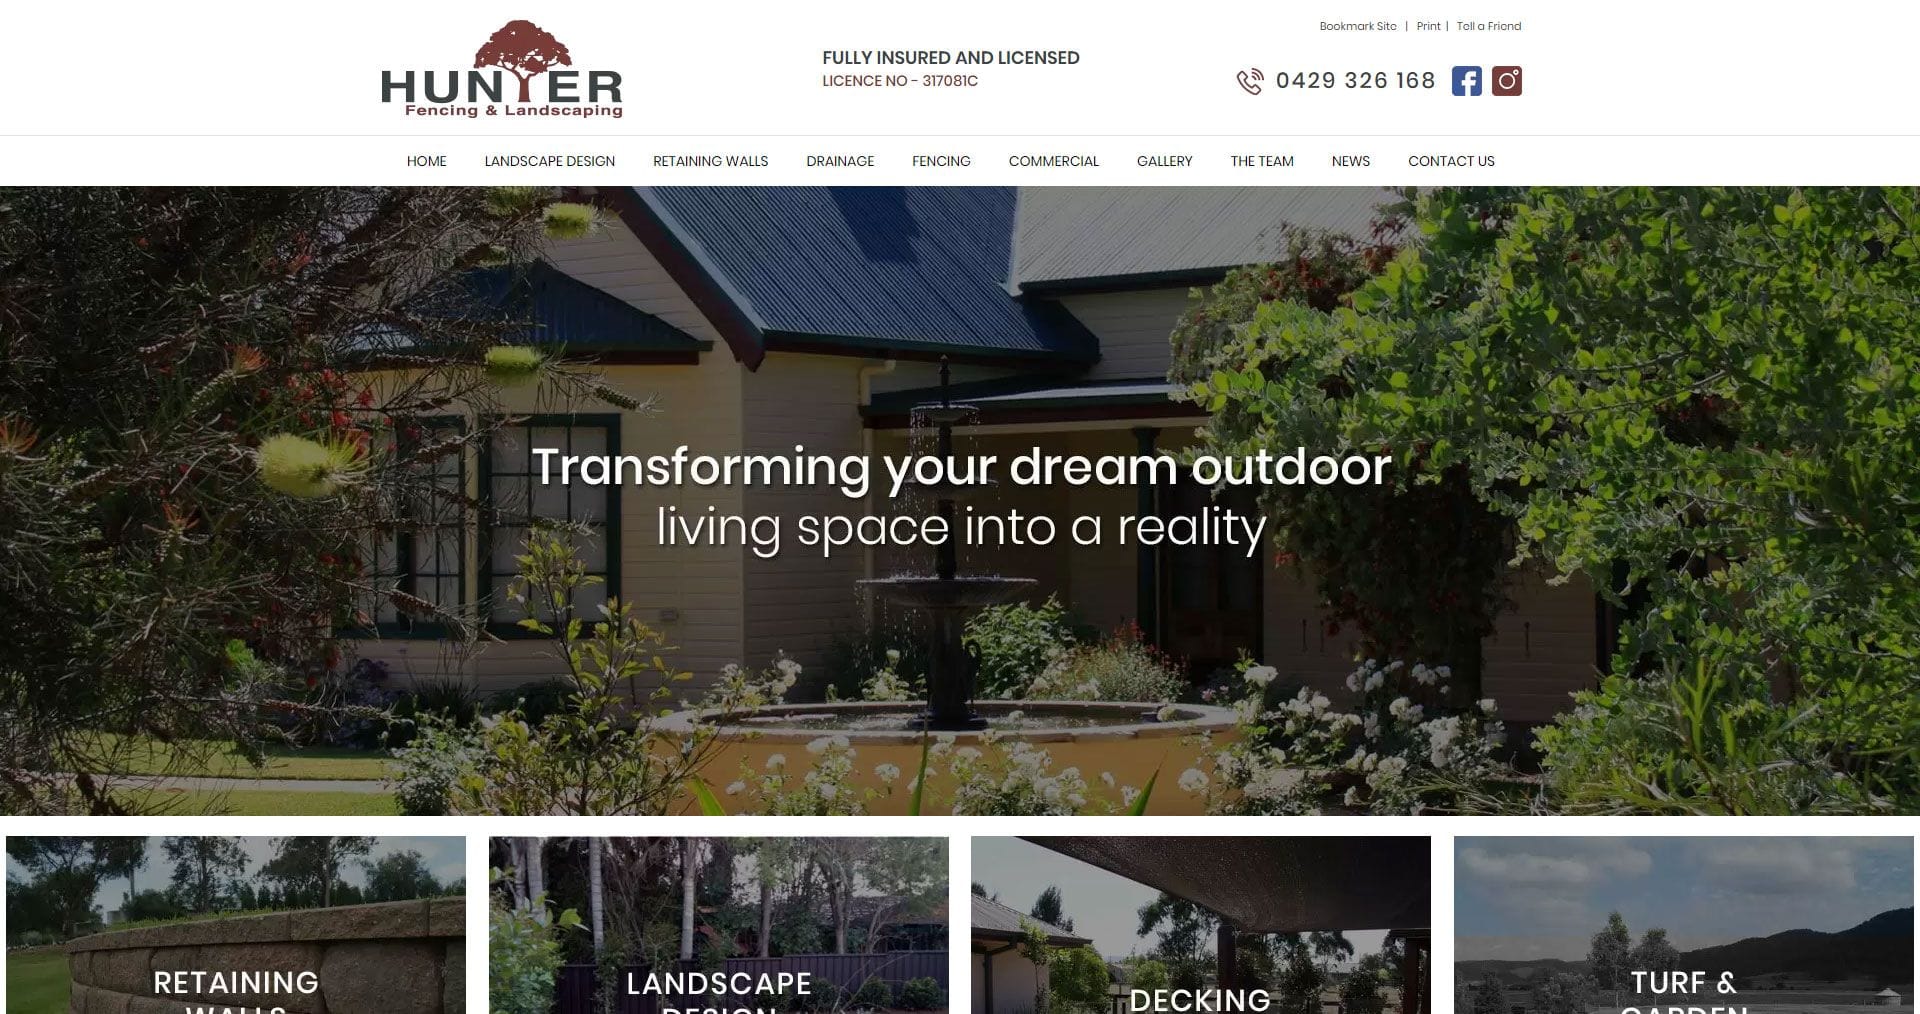 HUNTER FENCING & LANDSCAPING | Client Success Stories